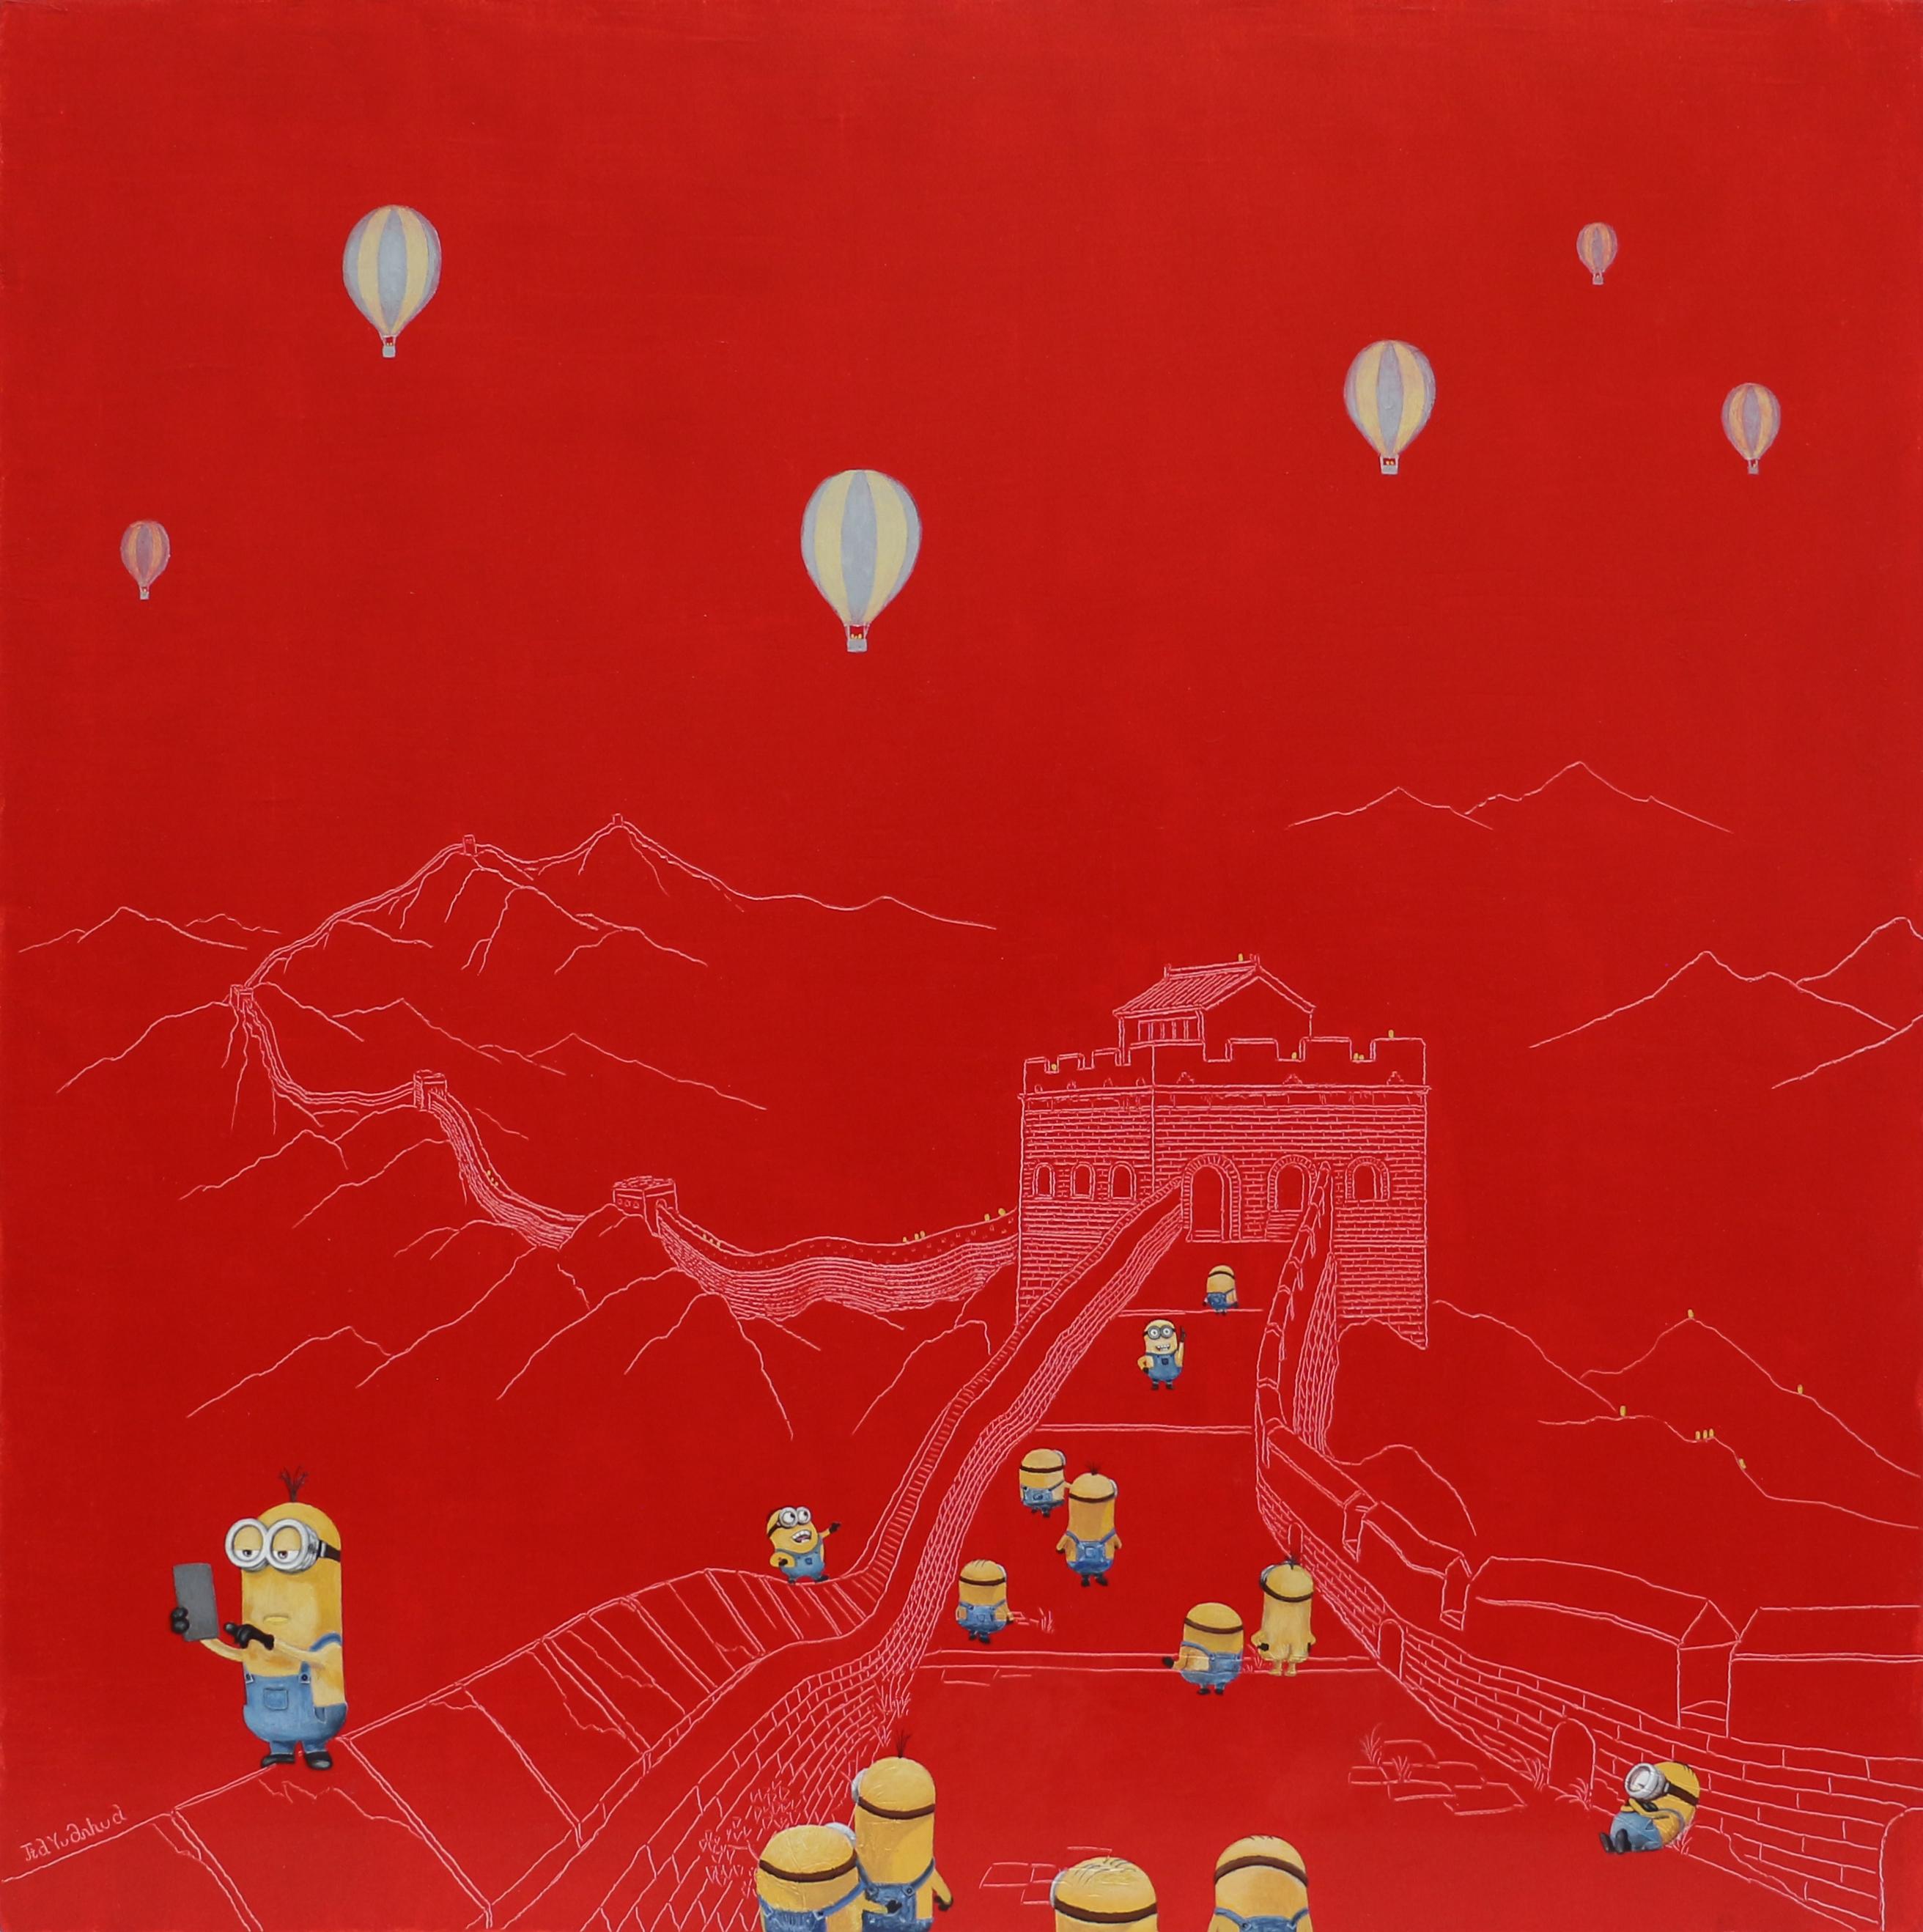 Artwork sold framed: 76 x 76 x 5,5 cm. The Great Wall of China is well known in the world. Tens of millions of tourists from all over the world come to visit it every year. In fact, most tourist attractions in the world are overcrowded. The result